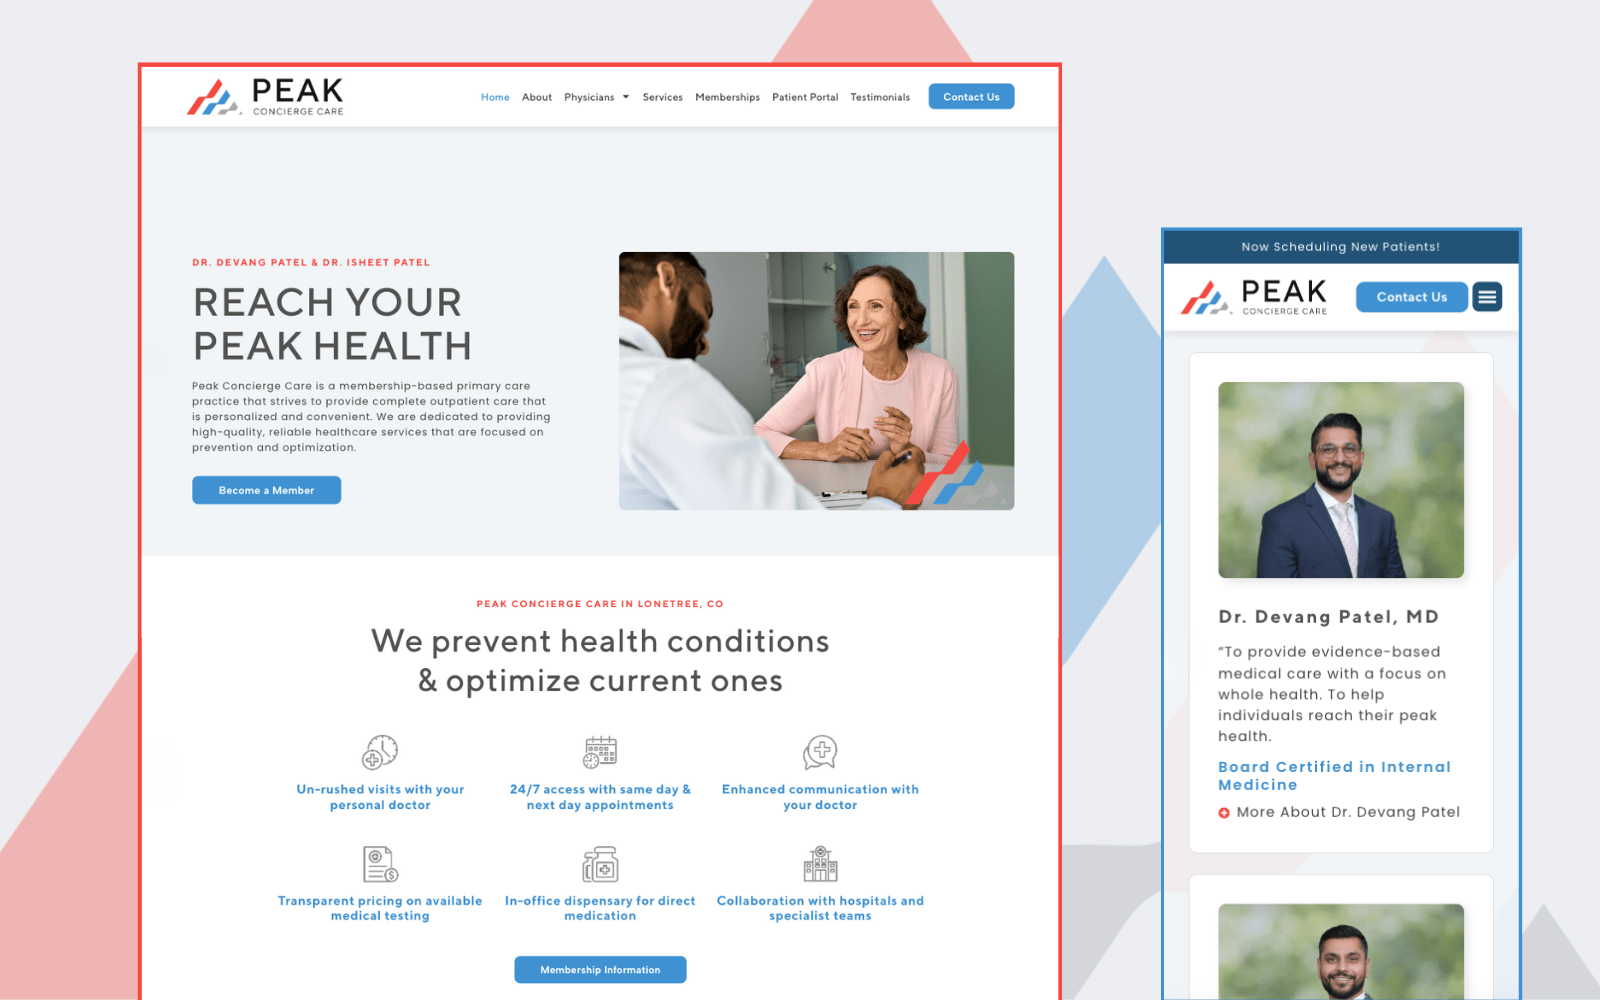 A modern and clean website design for a healthcare company, featuring a blue and white color scheme with easy navigation.